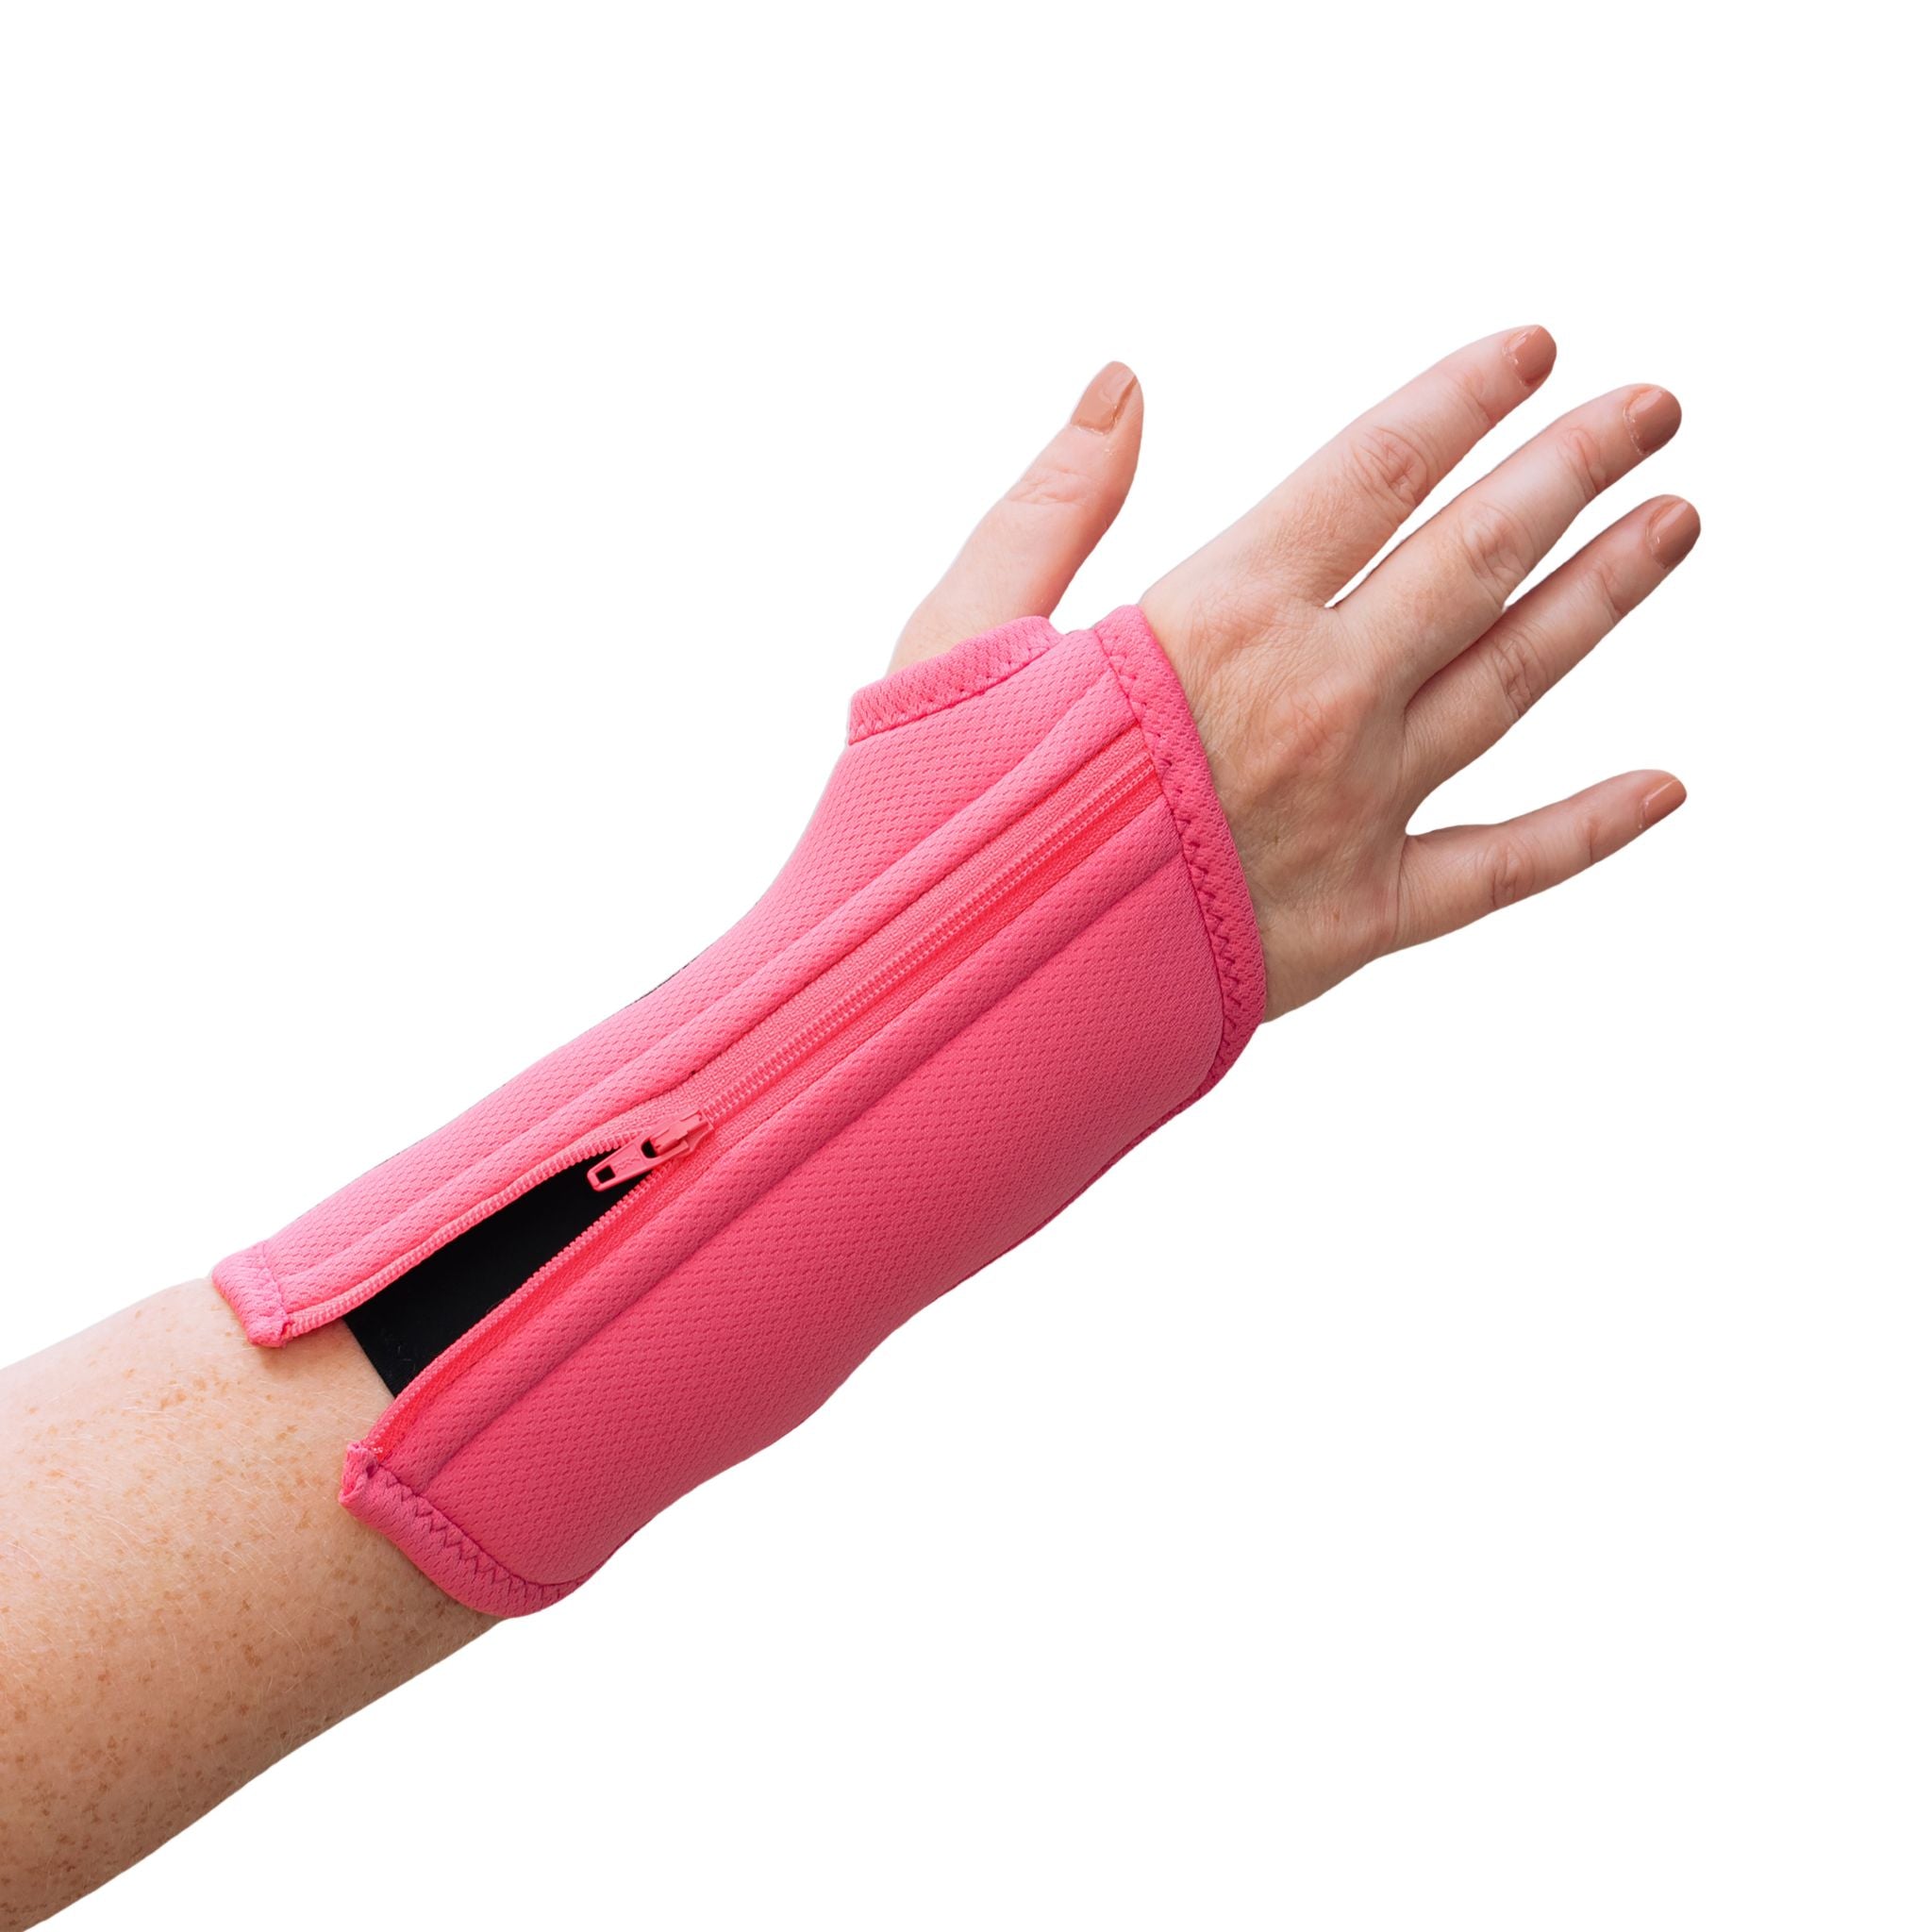 In a close-up, a woman with arthritis is showing her hand with a slightly unzipped Bubblegum Pink Wrist Brace. The background is white.